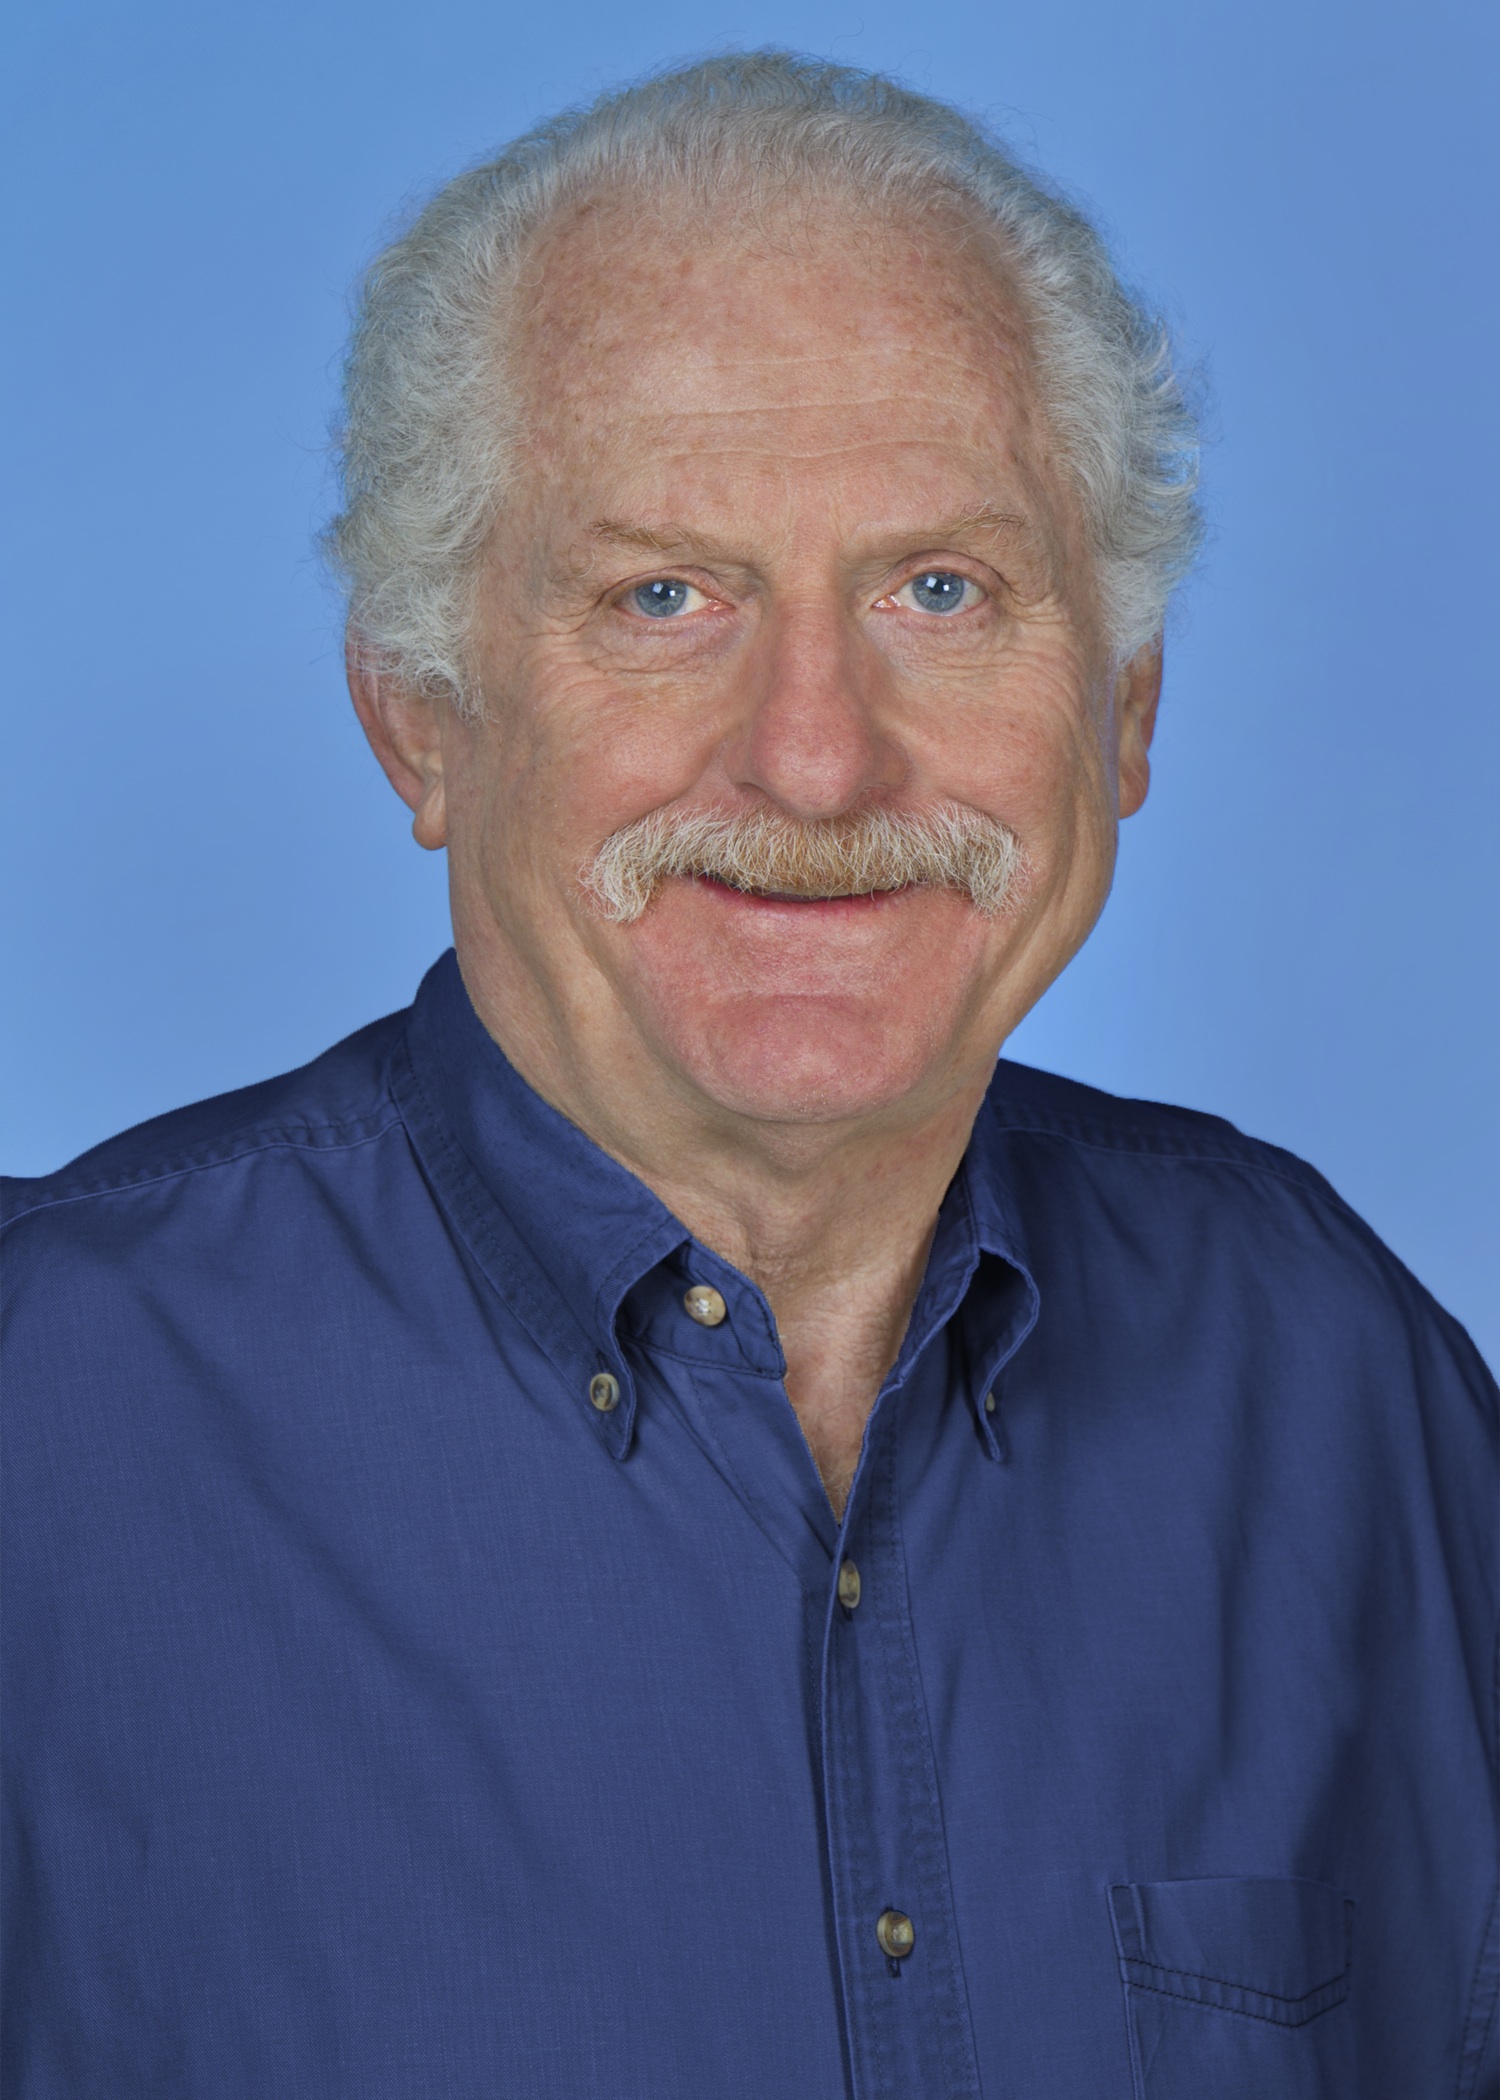 NI co-founder, president and CEO Dr James Truchard